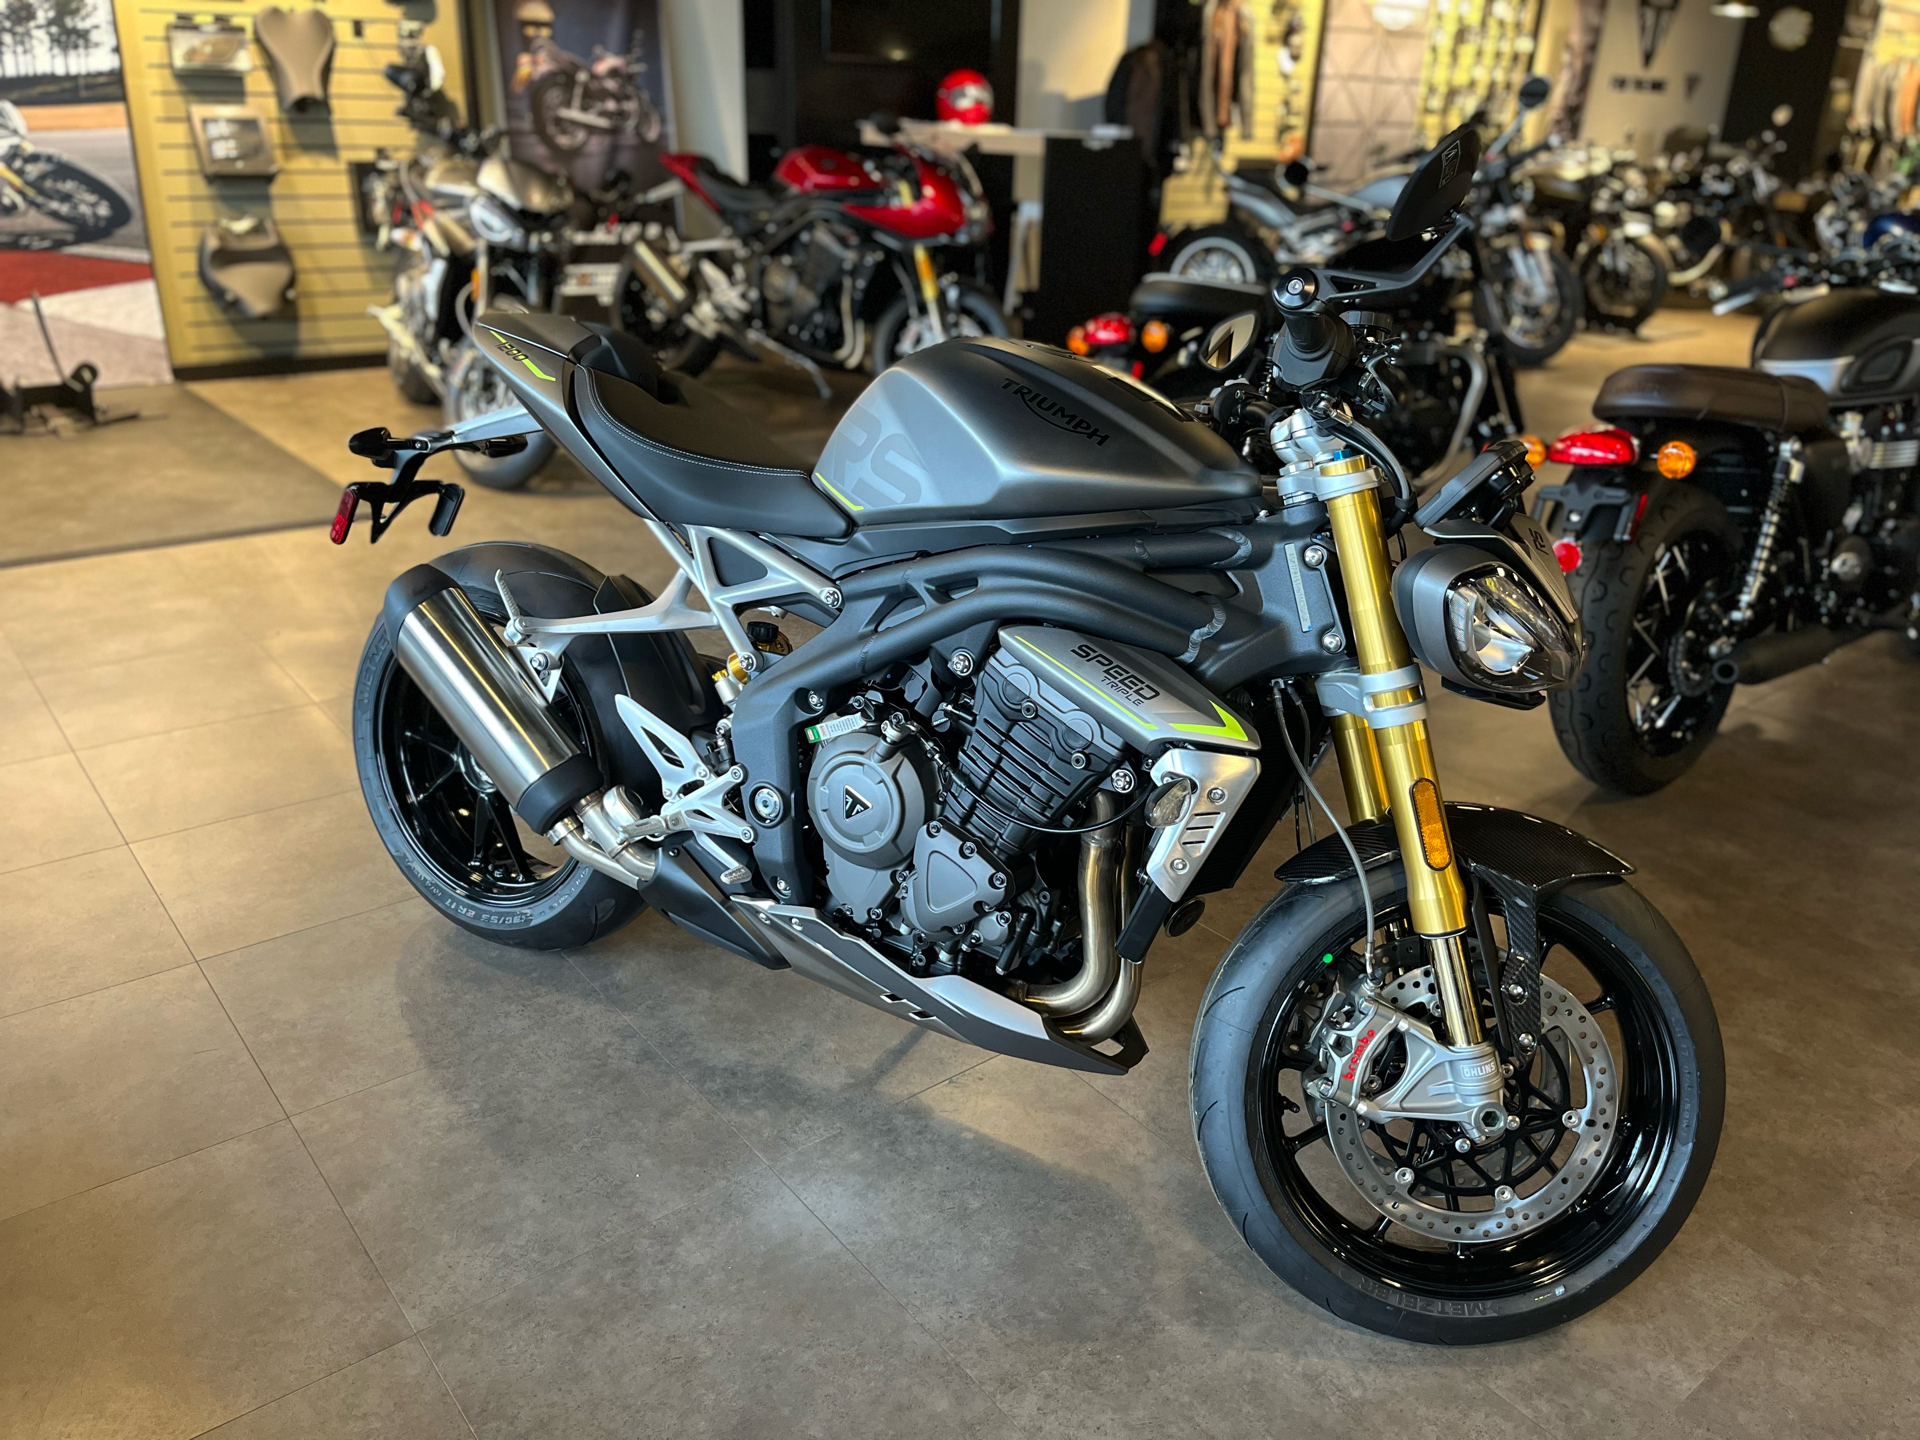 2022 Triumph Speed Triple 1200 RS in Shelby Township, Michigan - Photo 1